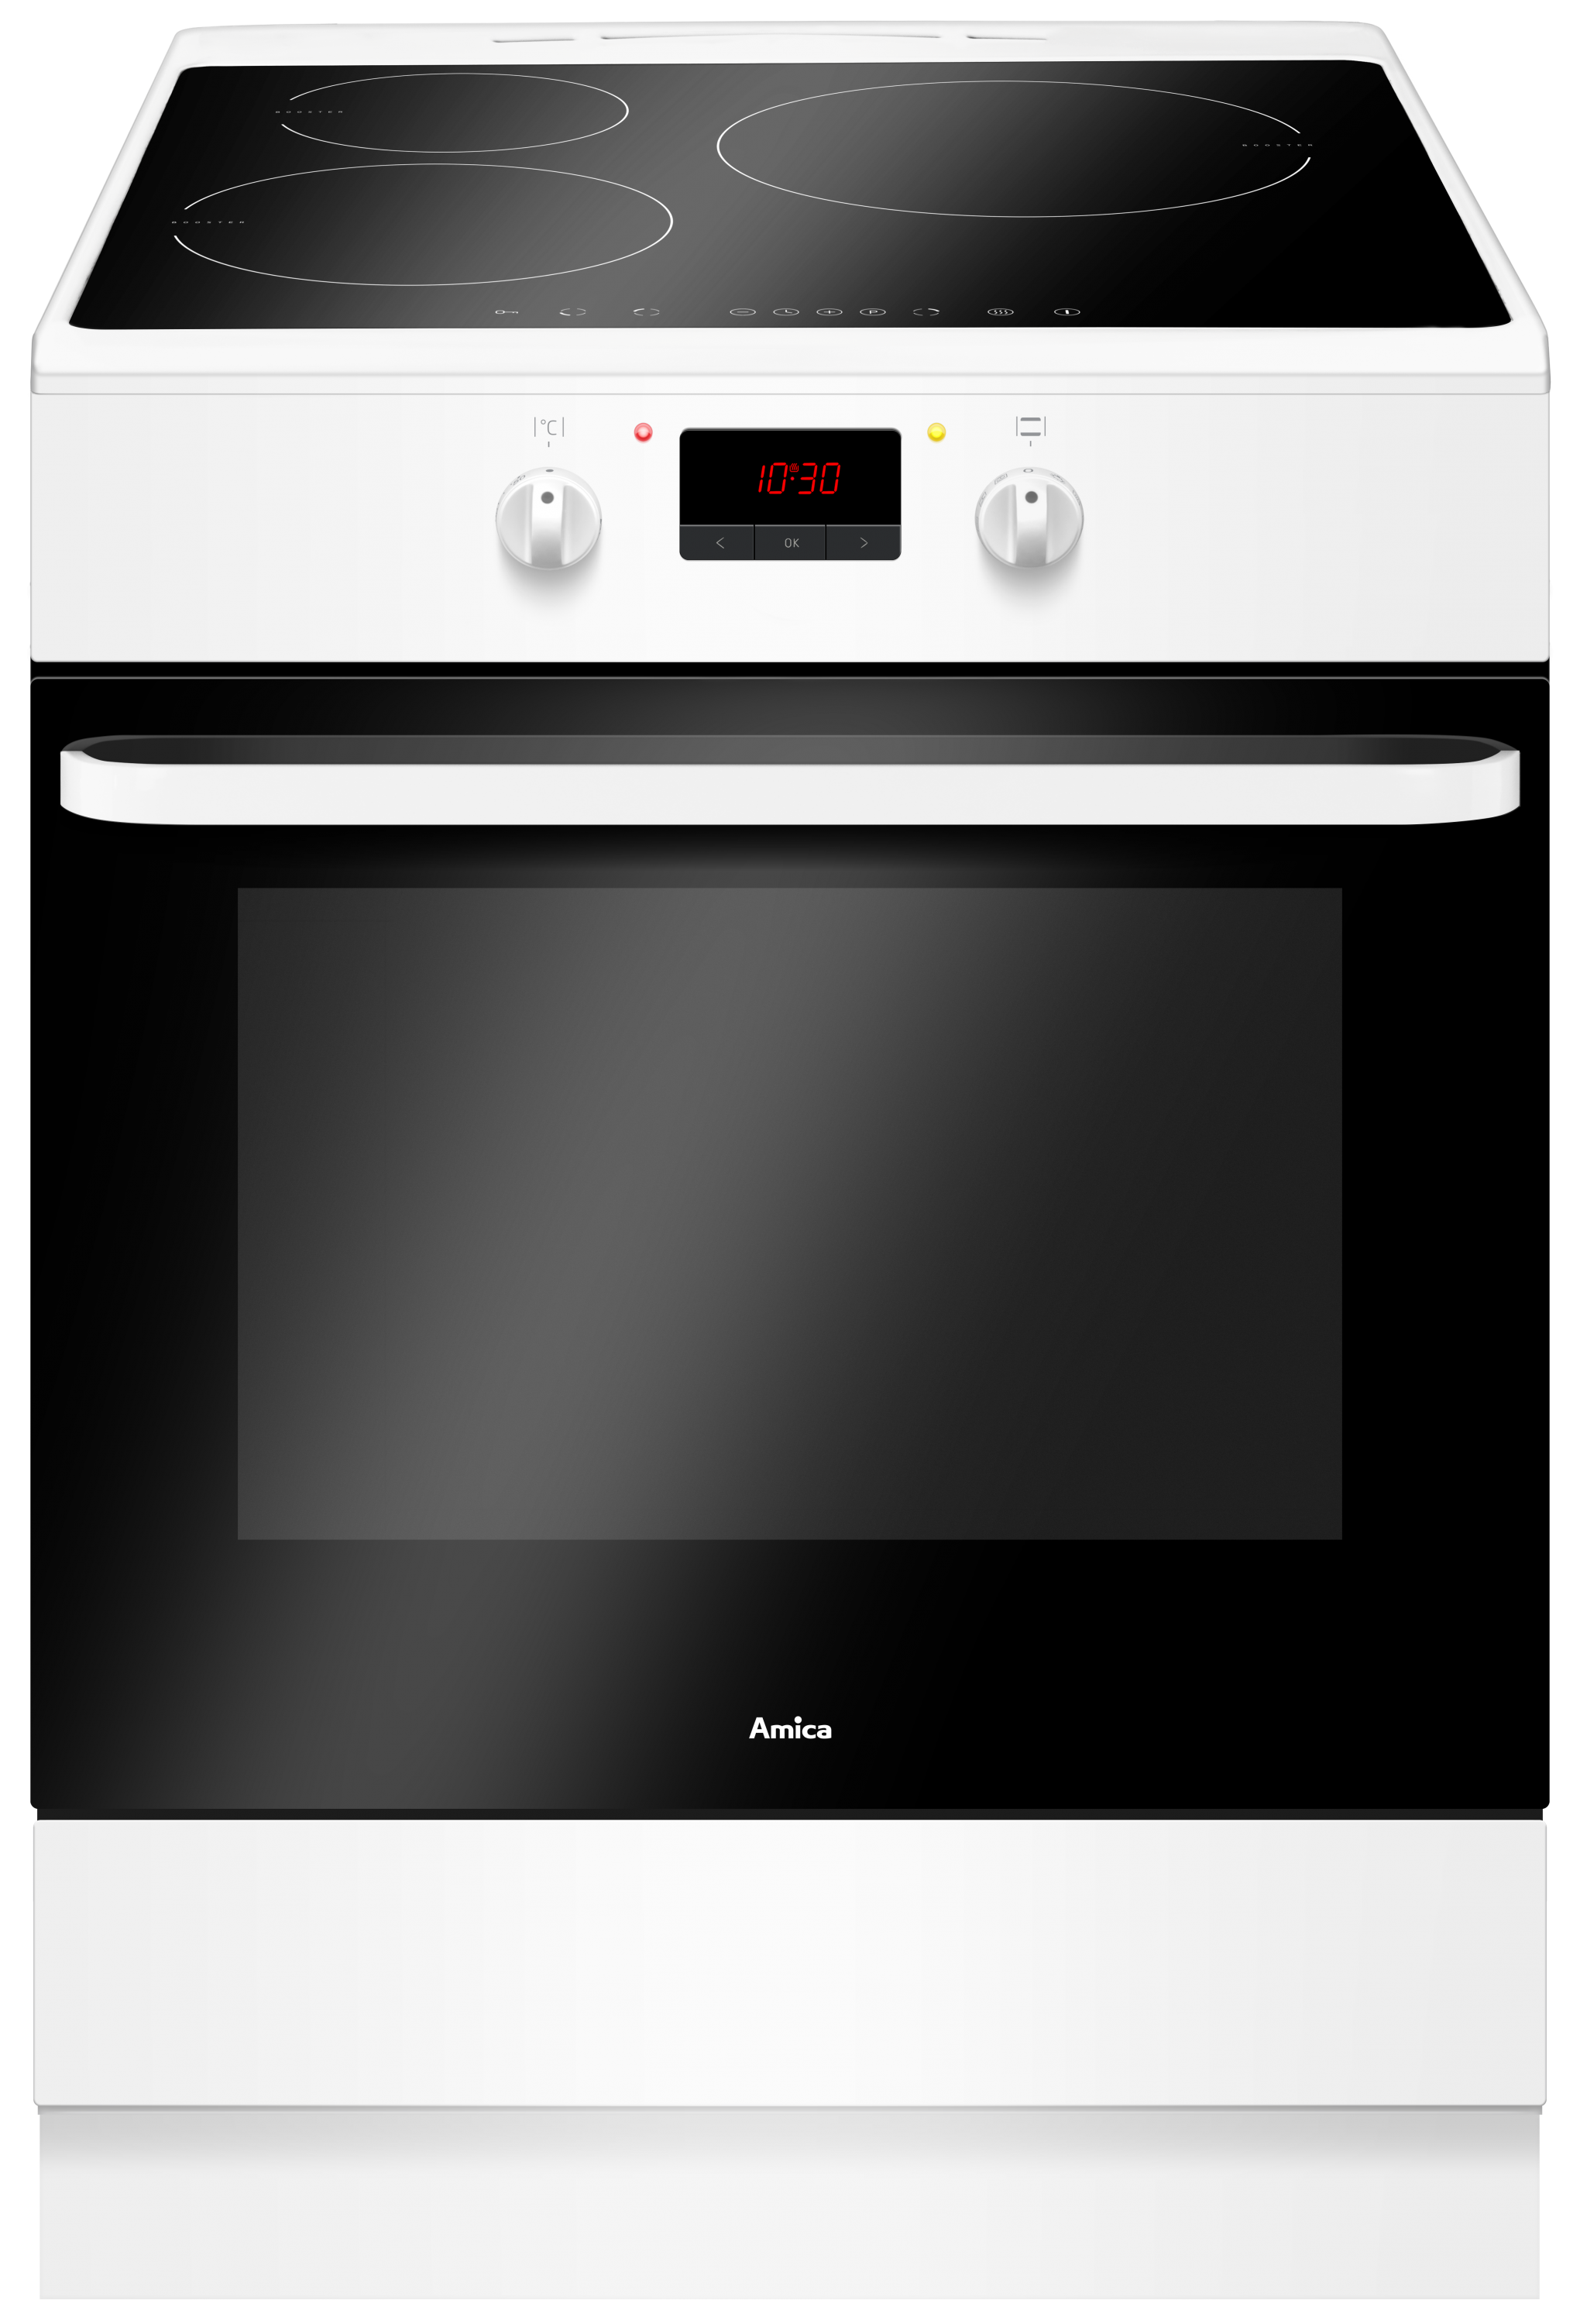 Freestanding induction cooker